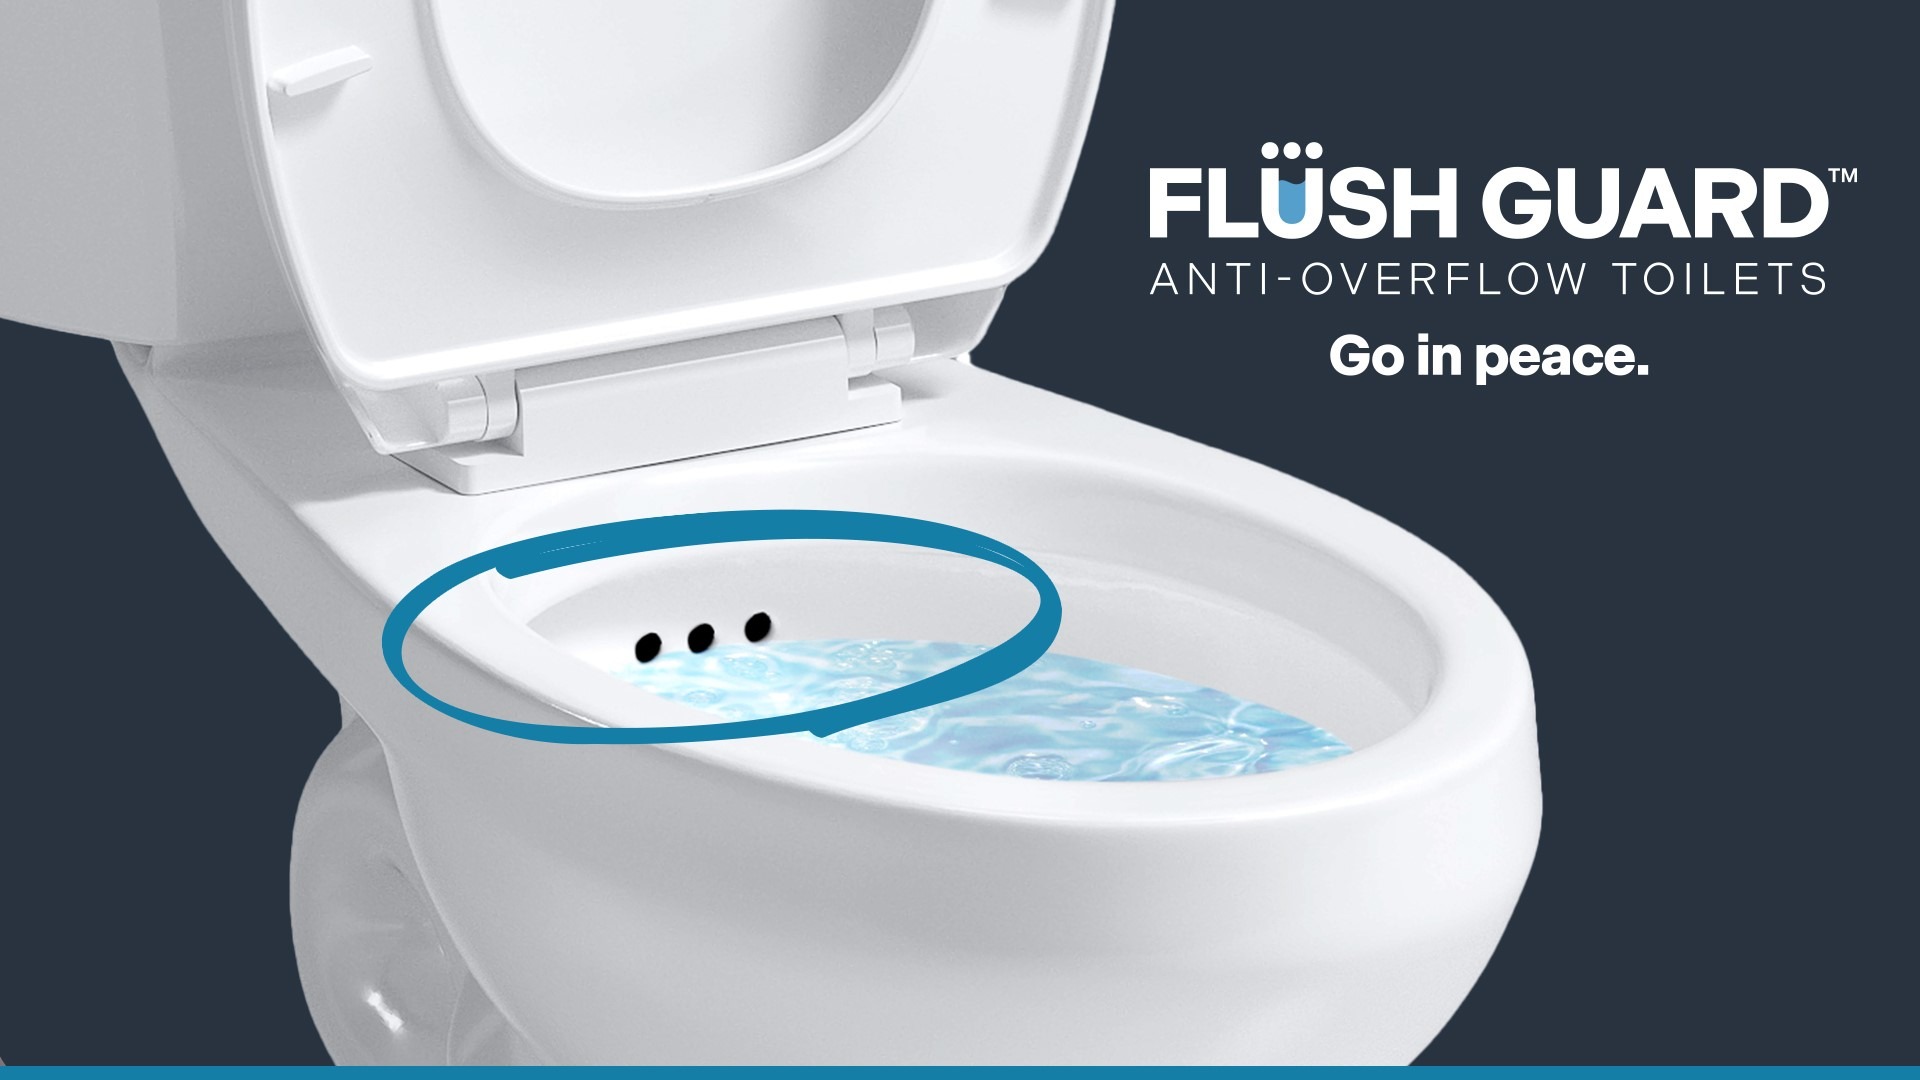 FGI Launches the First Flush GuardTM Anti-Overflow Toilets at KBIS 297